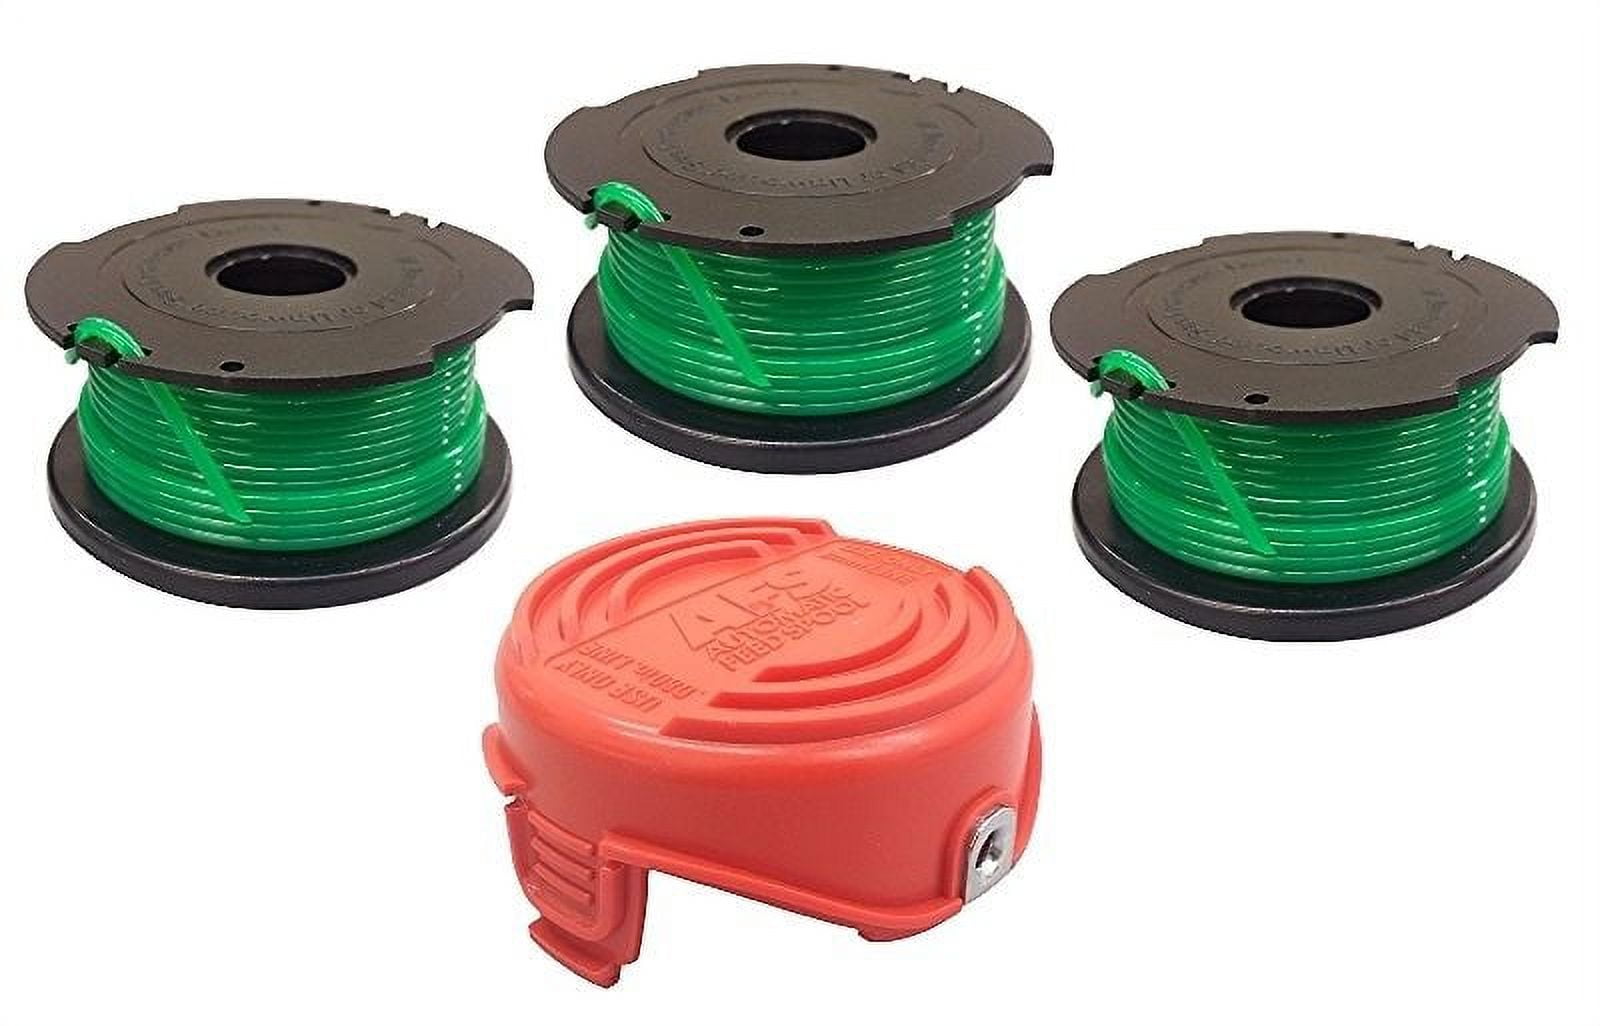 LEMETOW 1 Set Weed Eater Replacement Spools for Black & Decker ST1000  ST4000 ST4500 GE600 CST800 ST6800 (1 Spool, 1 Cap, 1 Spring) 